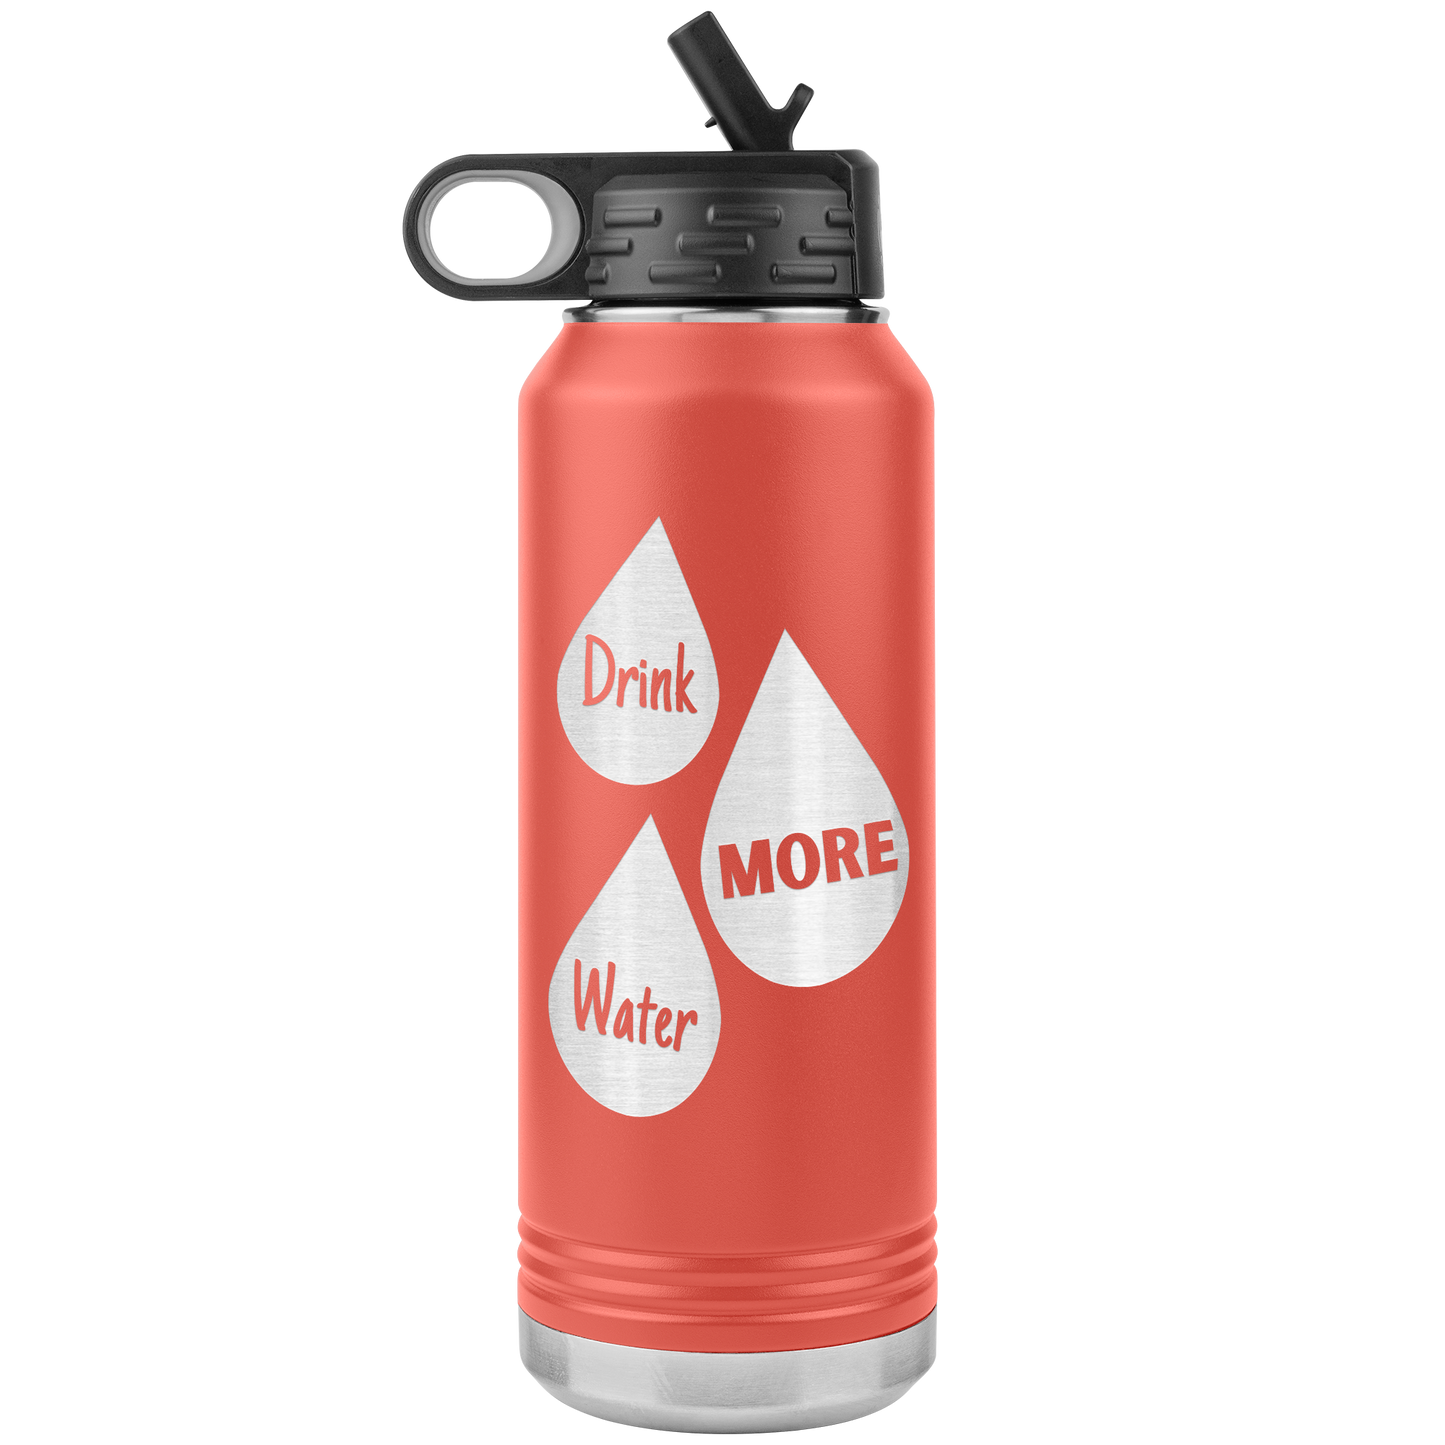 "Drink More Water" 32 oz. Insulated Stainless Steel Water Bottle with Flip Top Lid & Built-in Straw